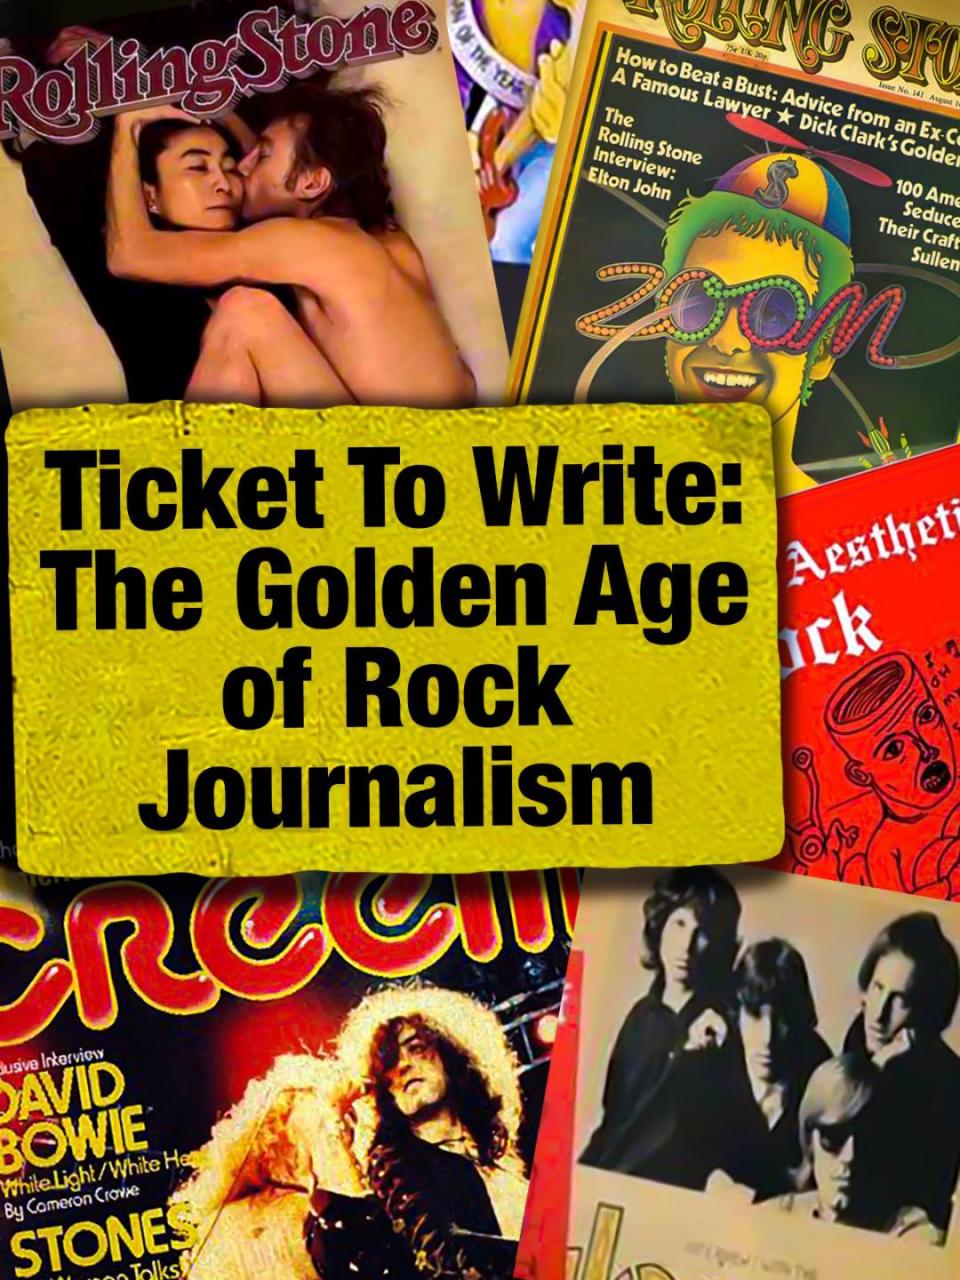 Ticket to Write: The Golden Age of Rock Journalism